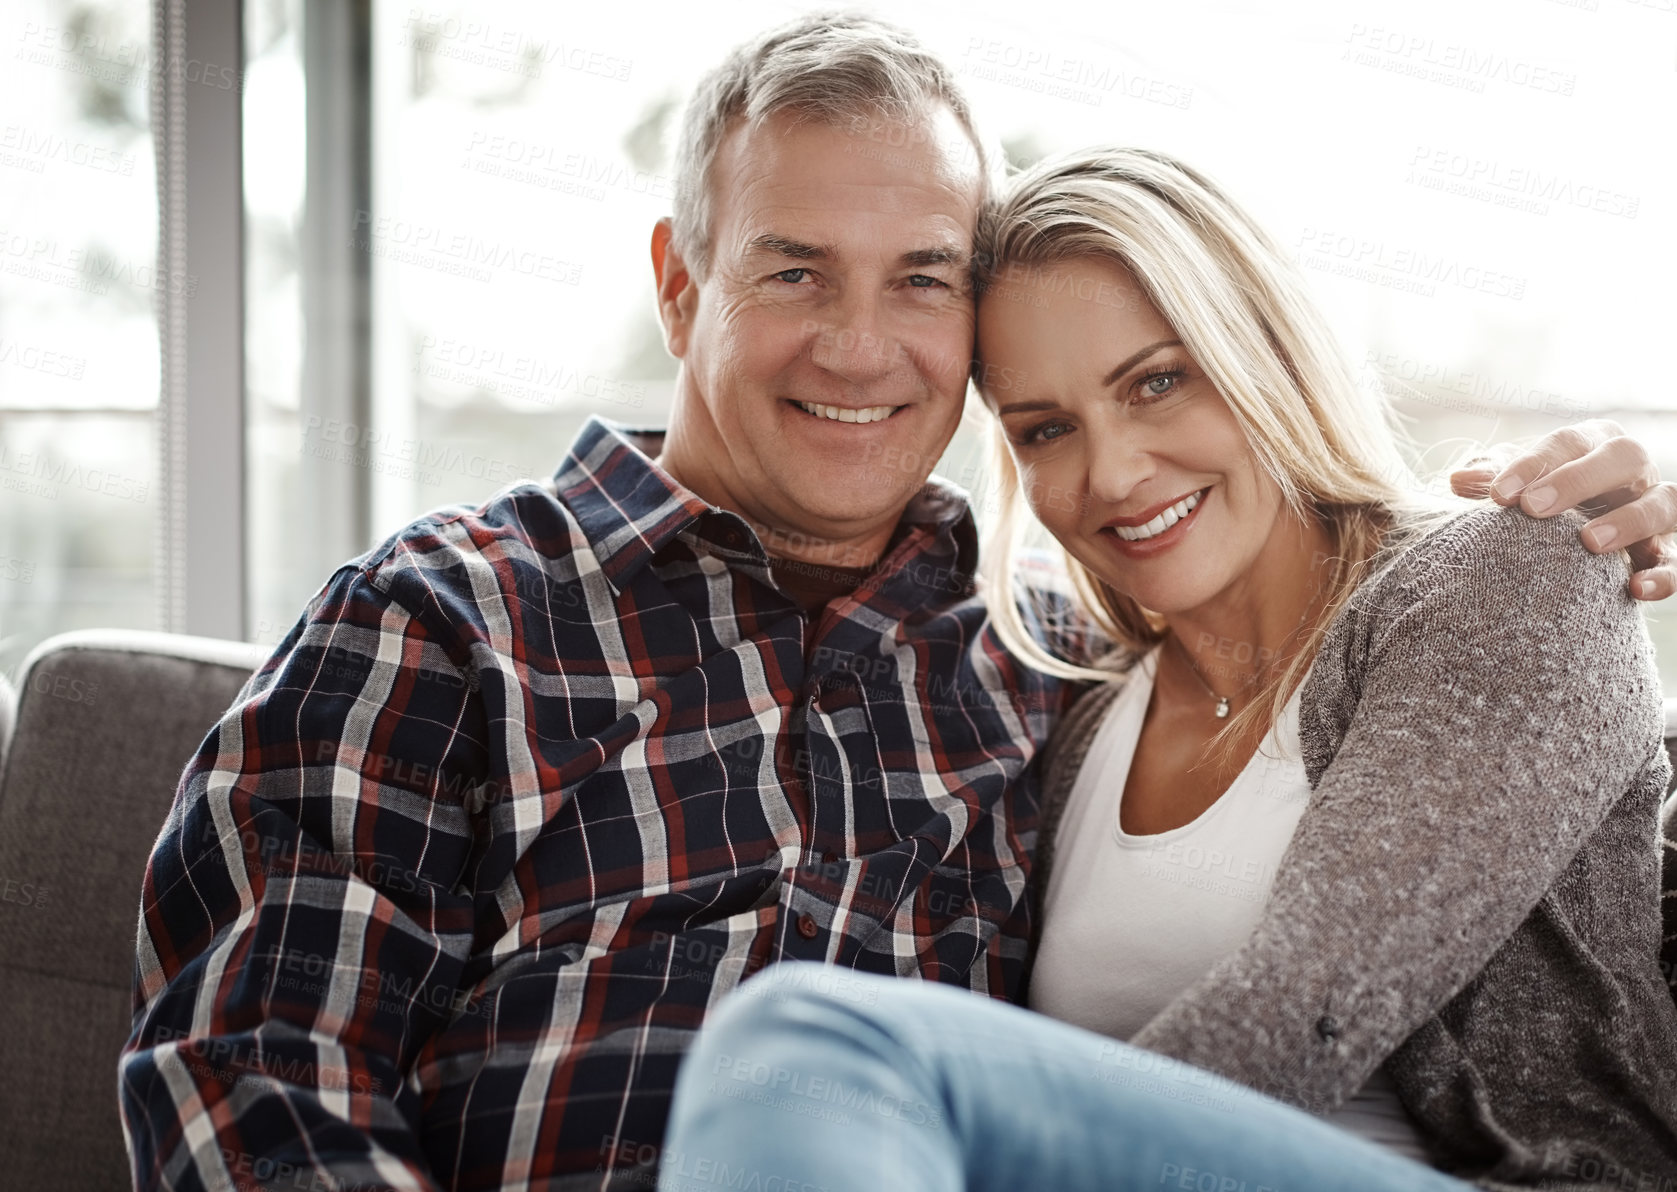 Buy stock photo Shot of an affectionate mature couple relaxing together on the sofa at home